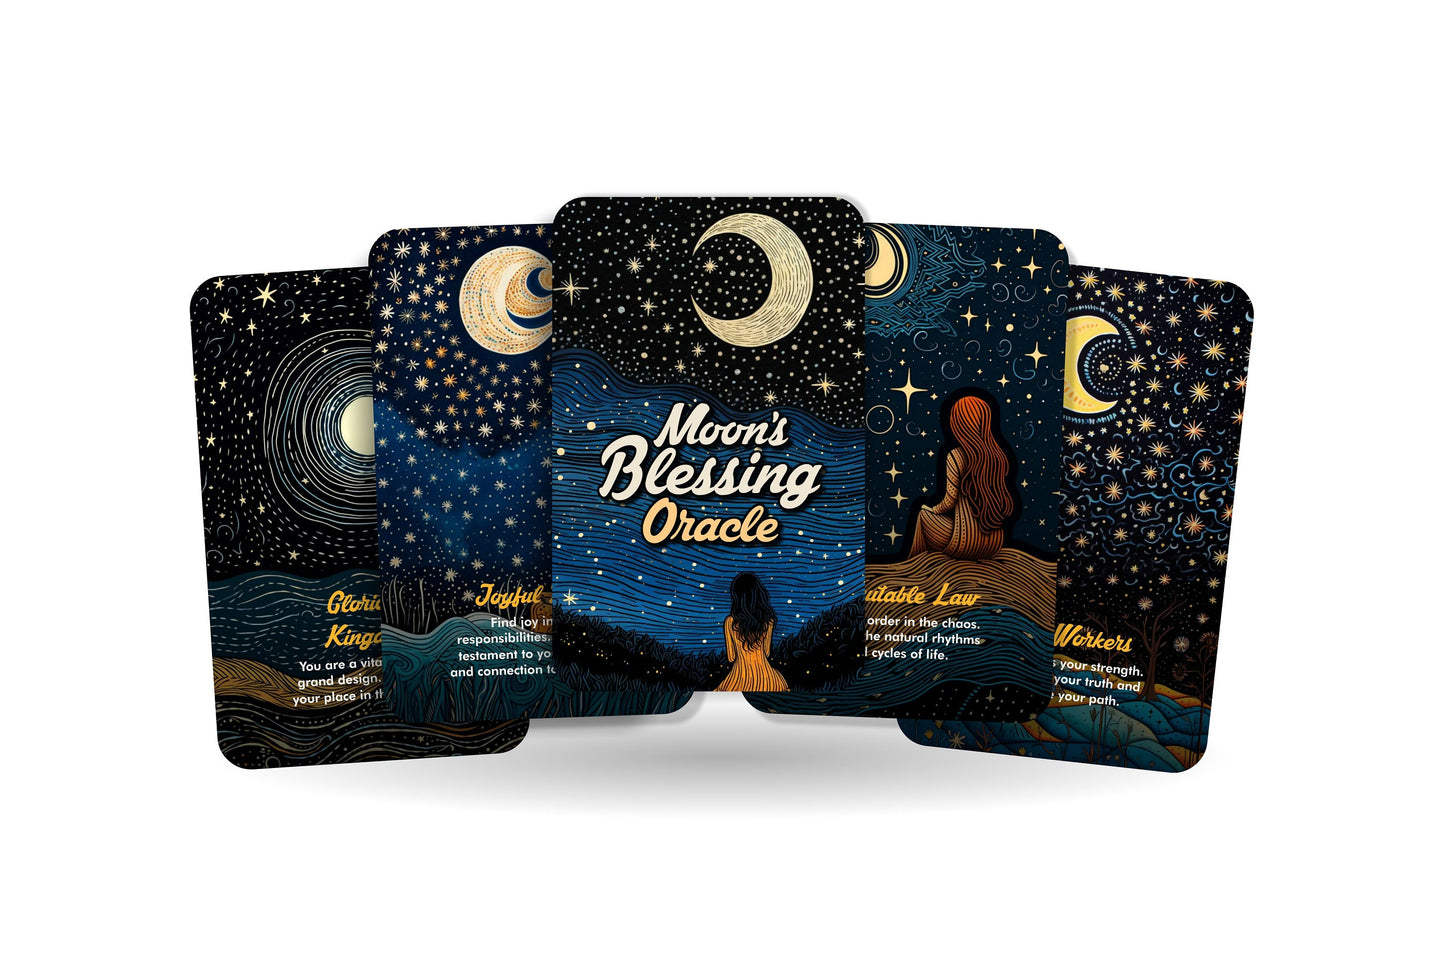 Moon's Blessing Oracle - Oracle cards  - Guided by Moonlight, Inspired by Faith